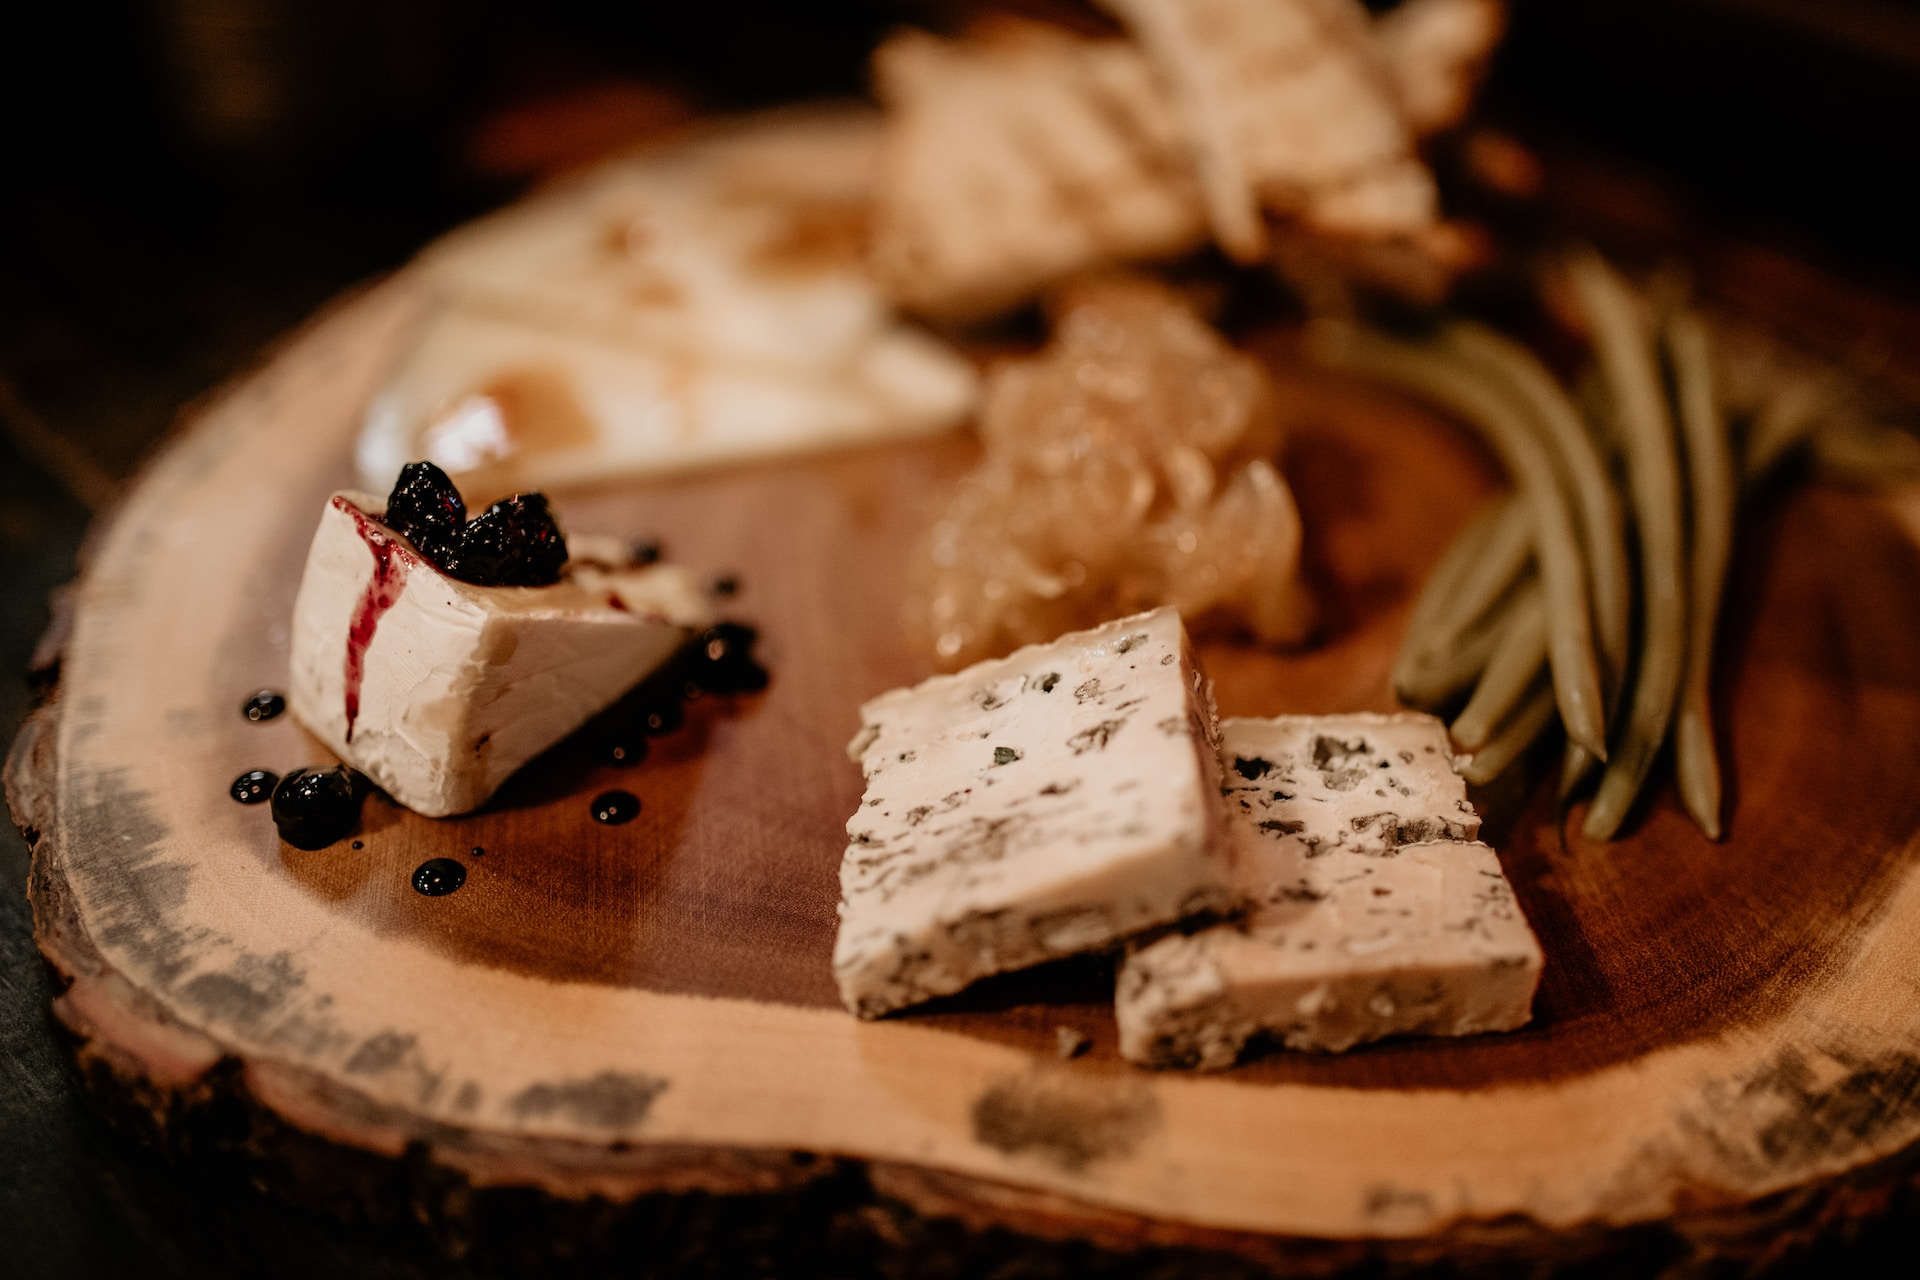 cheese, platter, artisan, delicacies, foodporn, culinary, appetizer, food presentation, creative common images